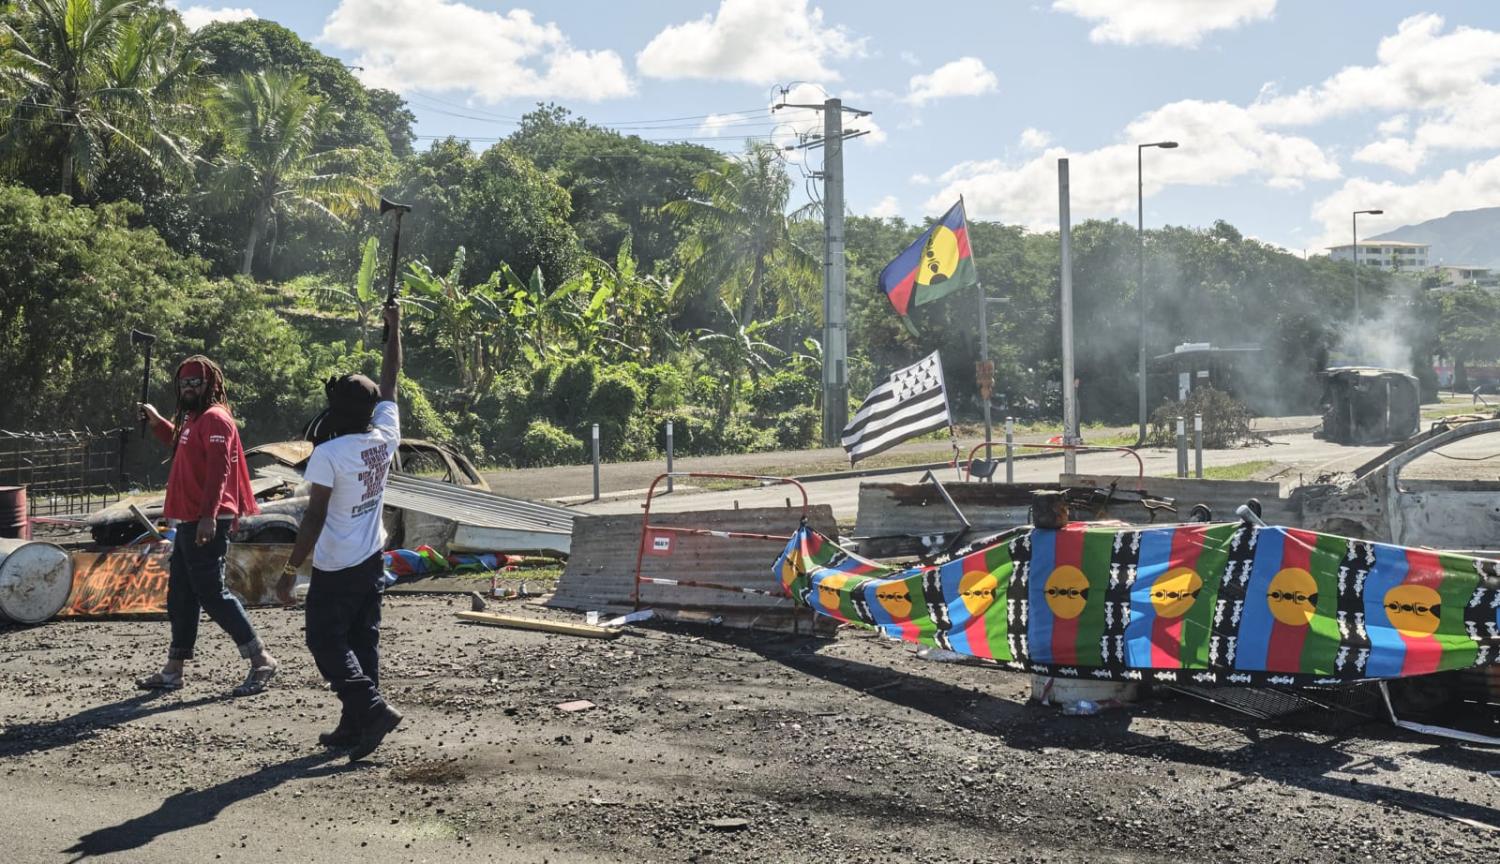 A roadblock barricade, with Kanak flags, controlling access to a district in Noumea, France's Pacific territory of New Caledonia, on 24 May (Theo Rouby/AFP via Getty Images)